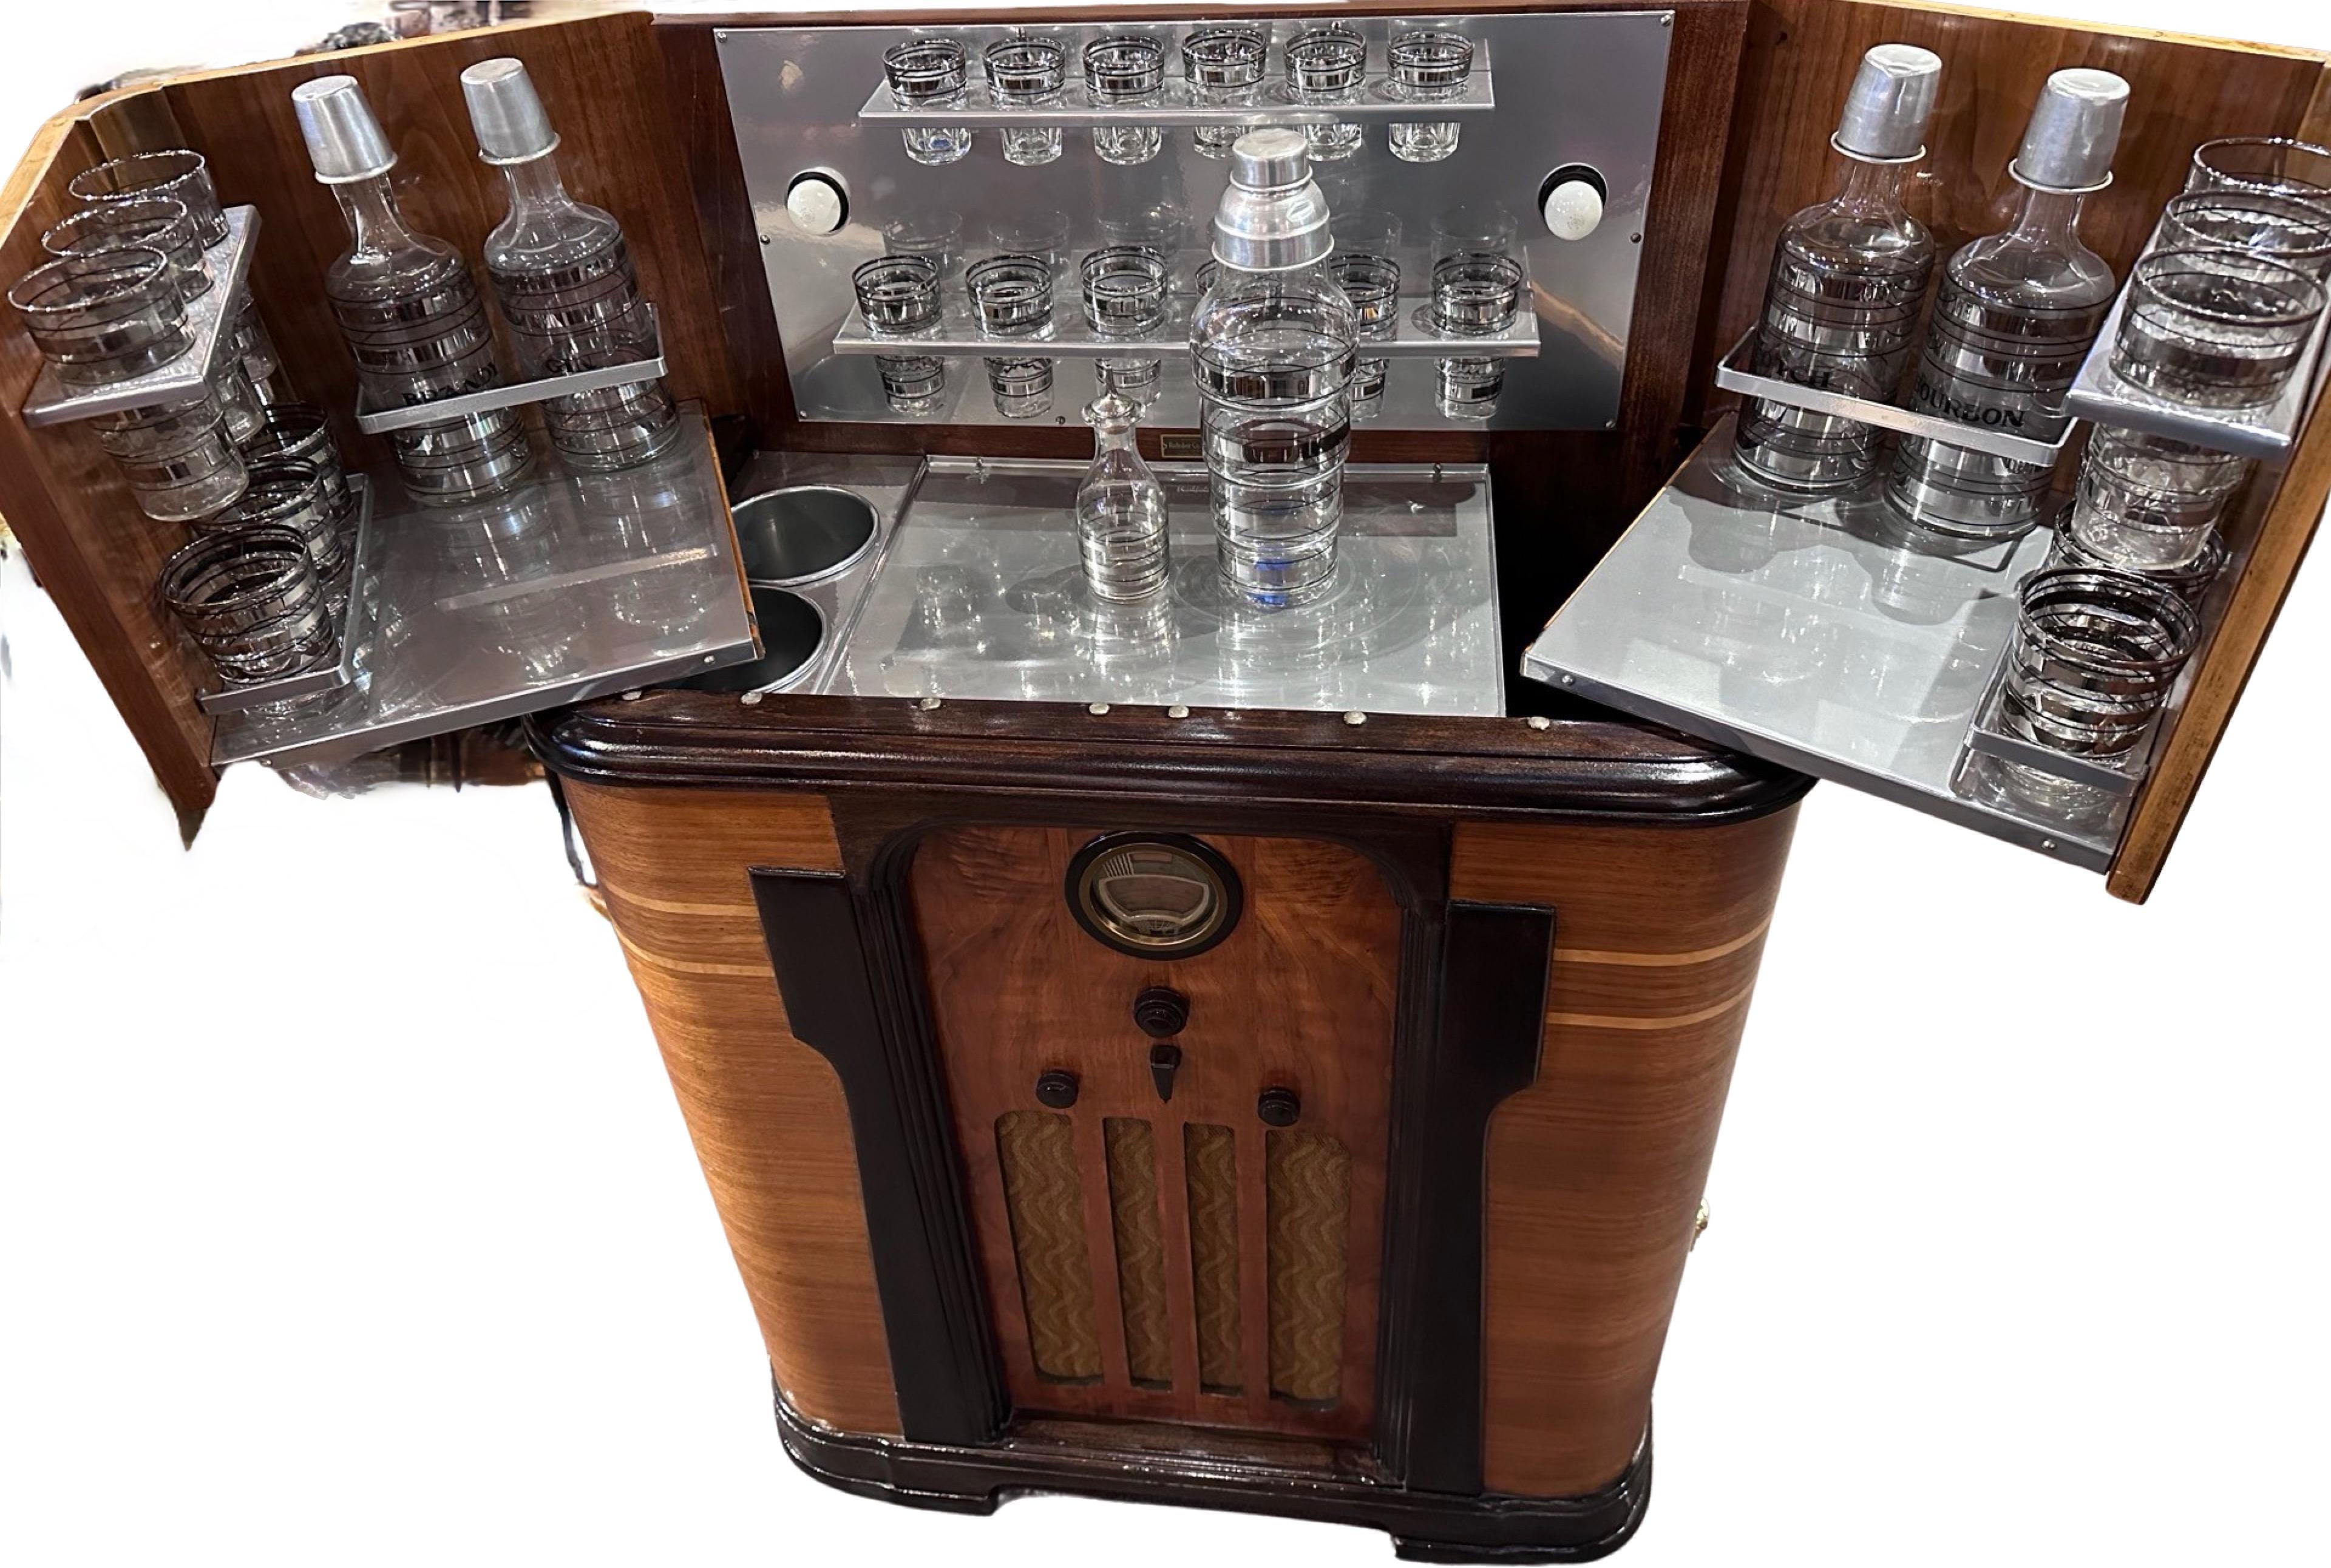 This spectacular Art Deco Philco Radio Bar is one of the most highly sought-after pieces by radio and bar enthusiasts alike. Created originally during the Prohibition Era – a time of fascination with hidden and secret liquor bars, it reached a high